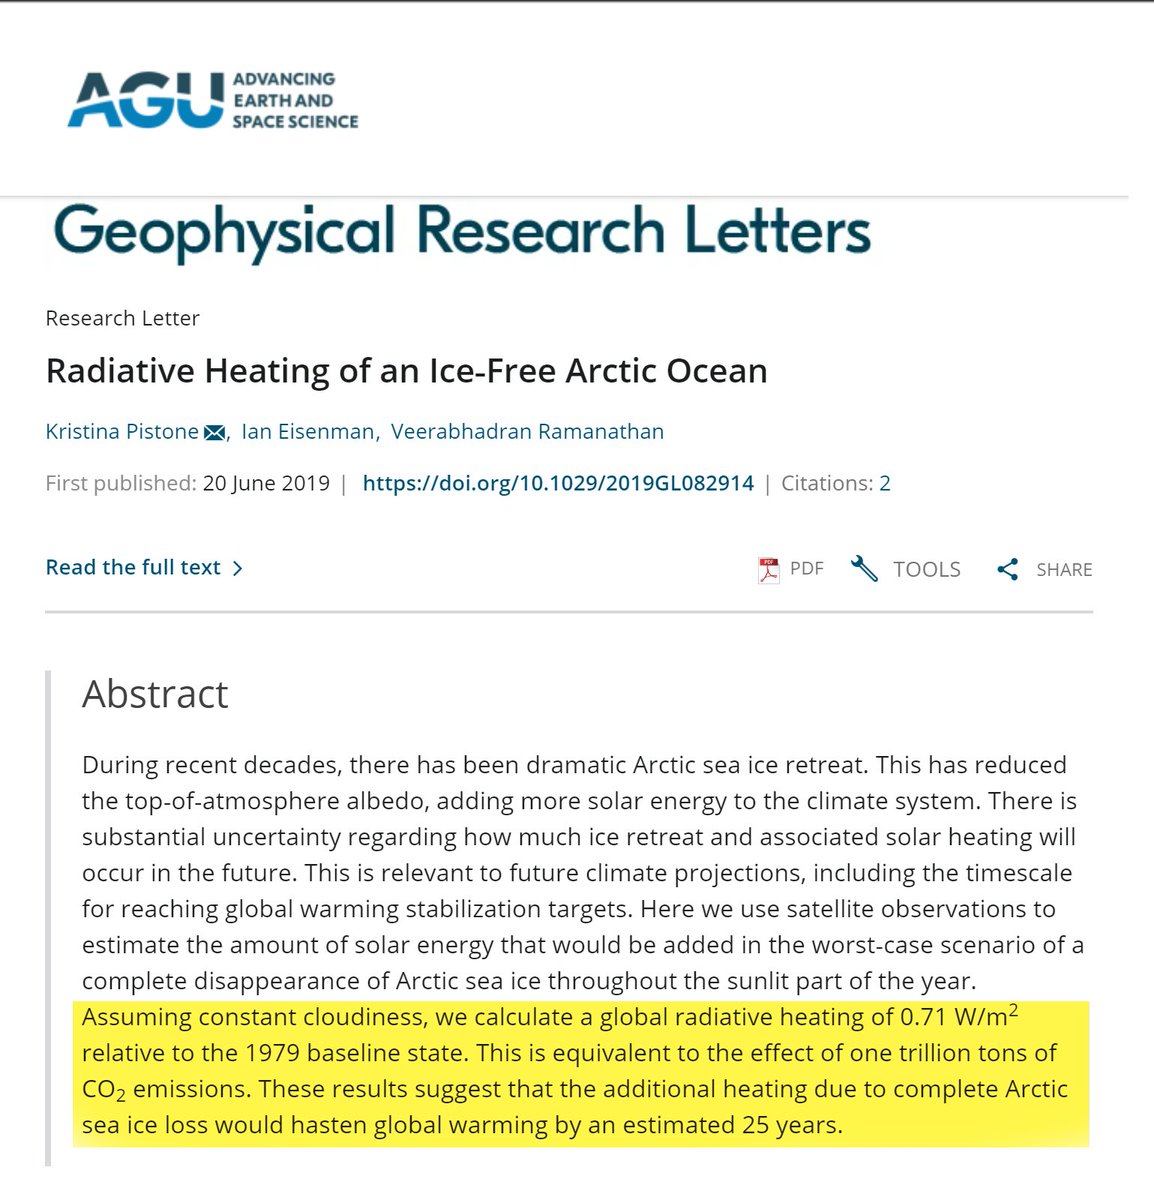 24/44 Side note, it is estimated that an ice-free arctic ocean would add the equivalent warming of ~1000 Gt of CO2 (in 2019 we emitted 36 Gt). https://agupubs.onlinelibrary.wiley.com/doi/abs/10.1029/2019GL082914